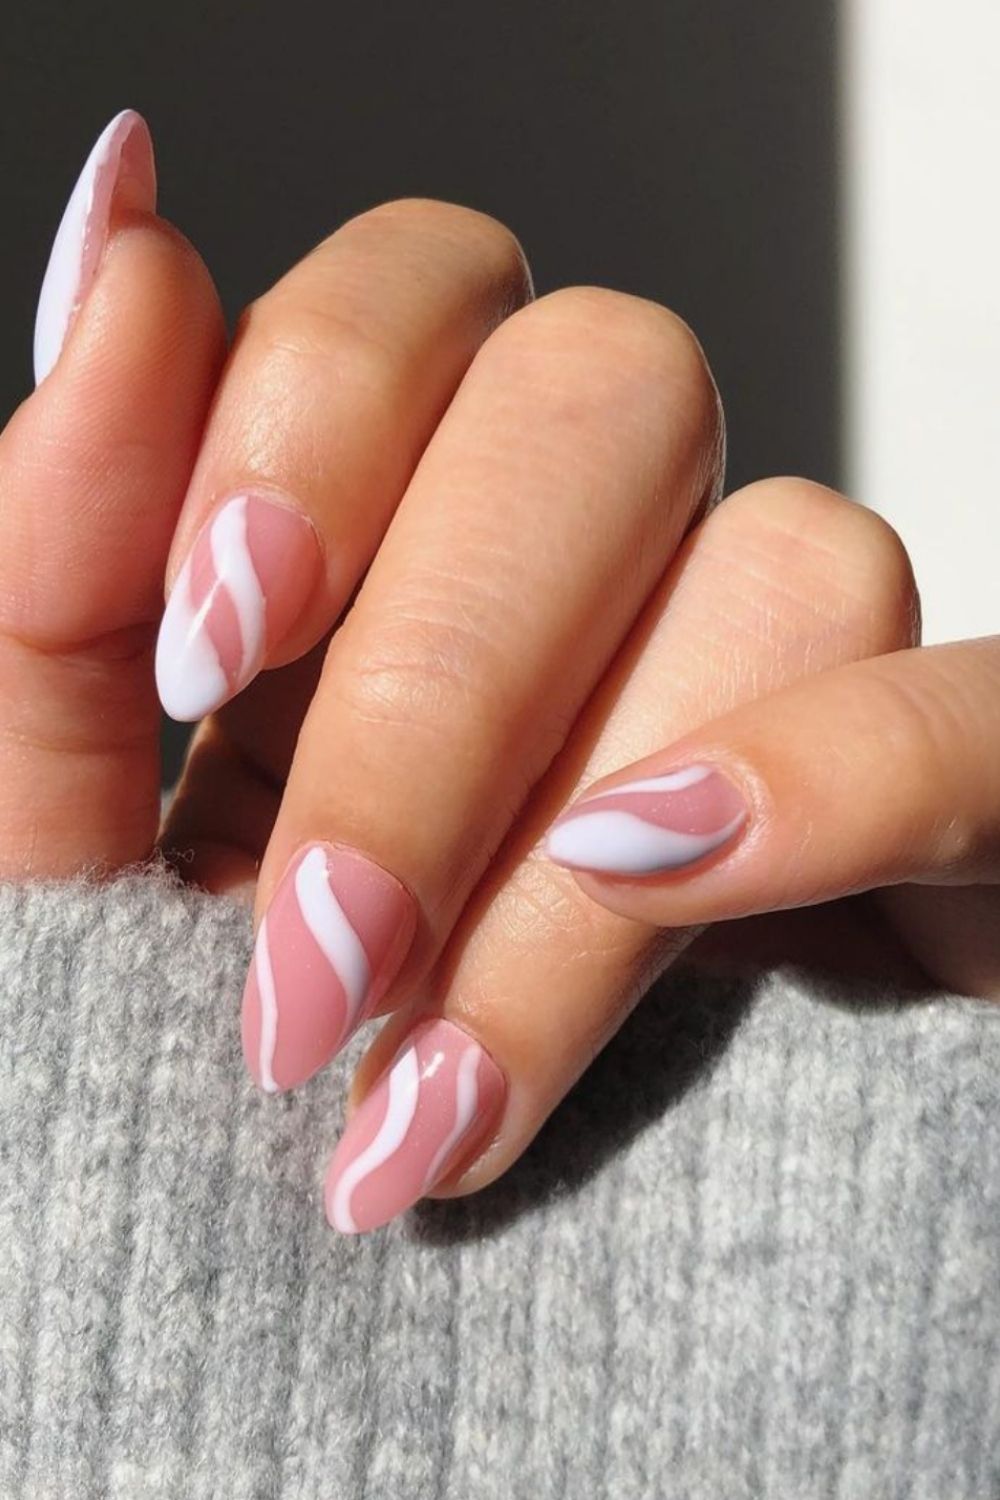 40+ Abstract Nail Art & Swirl Nails To Inspire Your Next Manicure